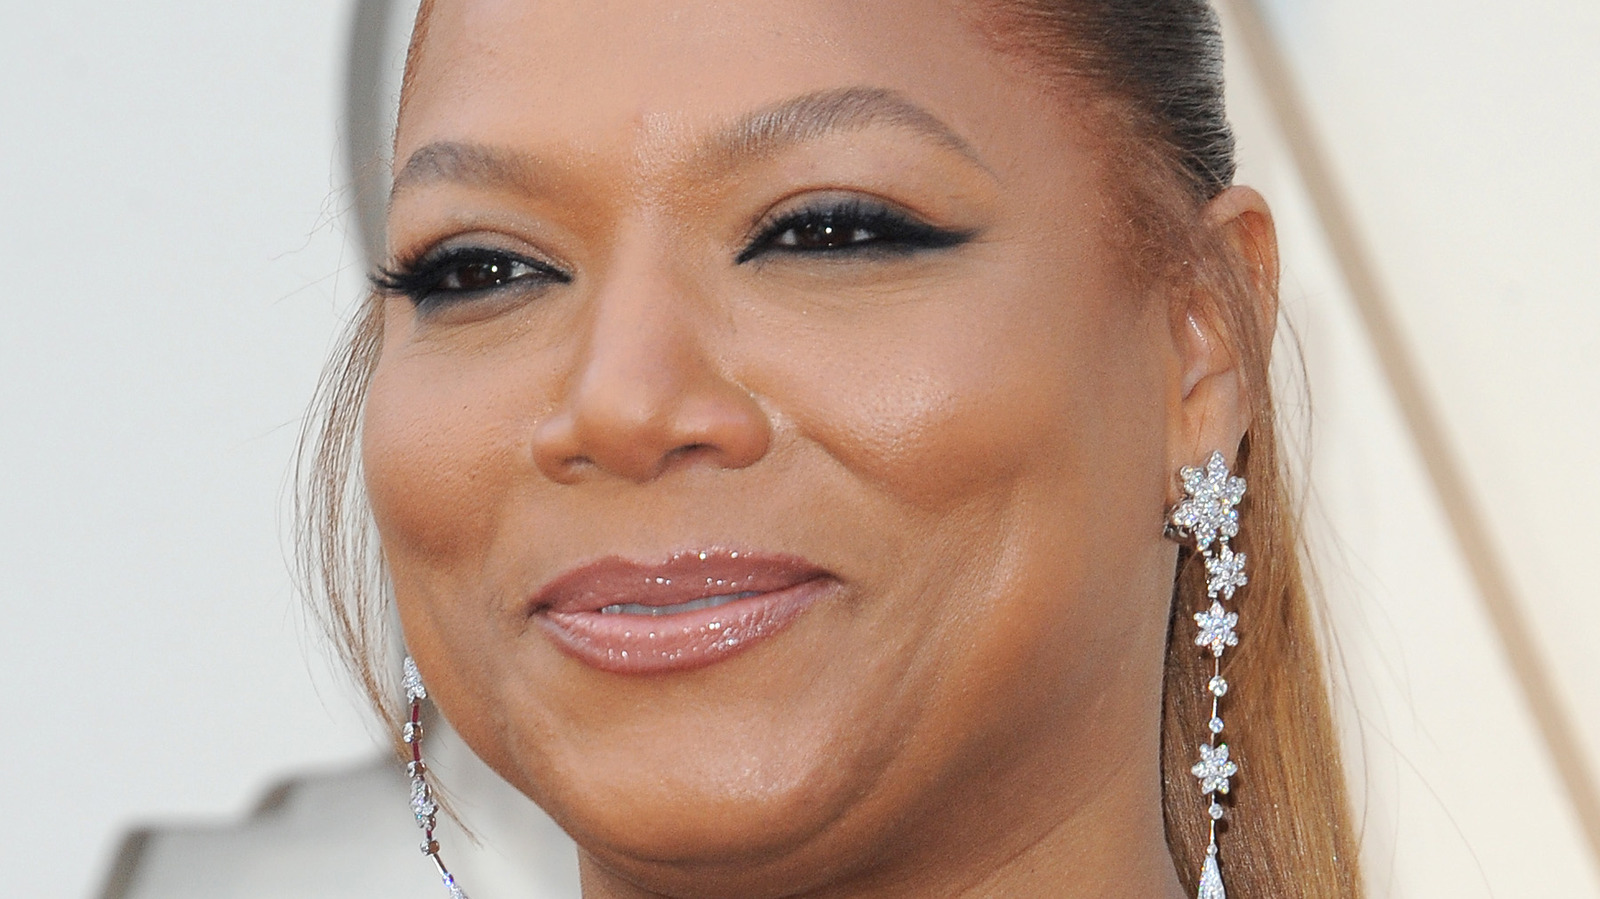 Watch Queen Latifah accept BET Awards honor, musical tribute to